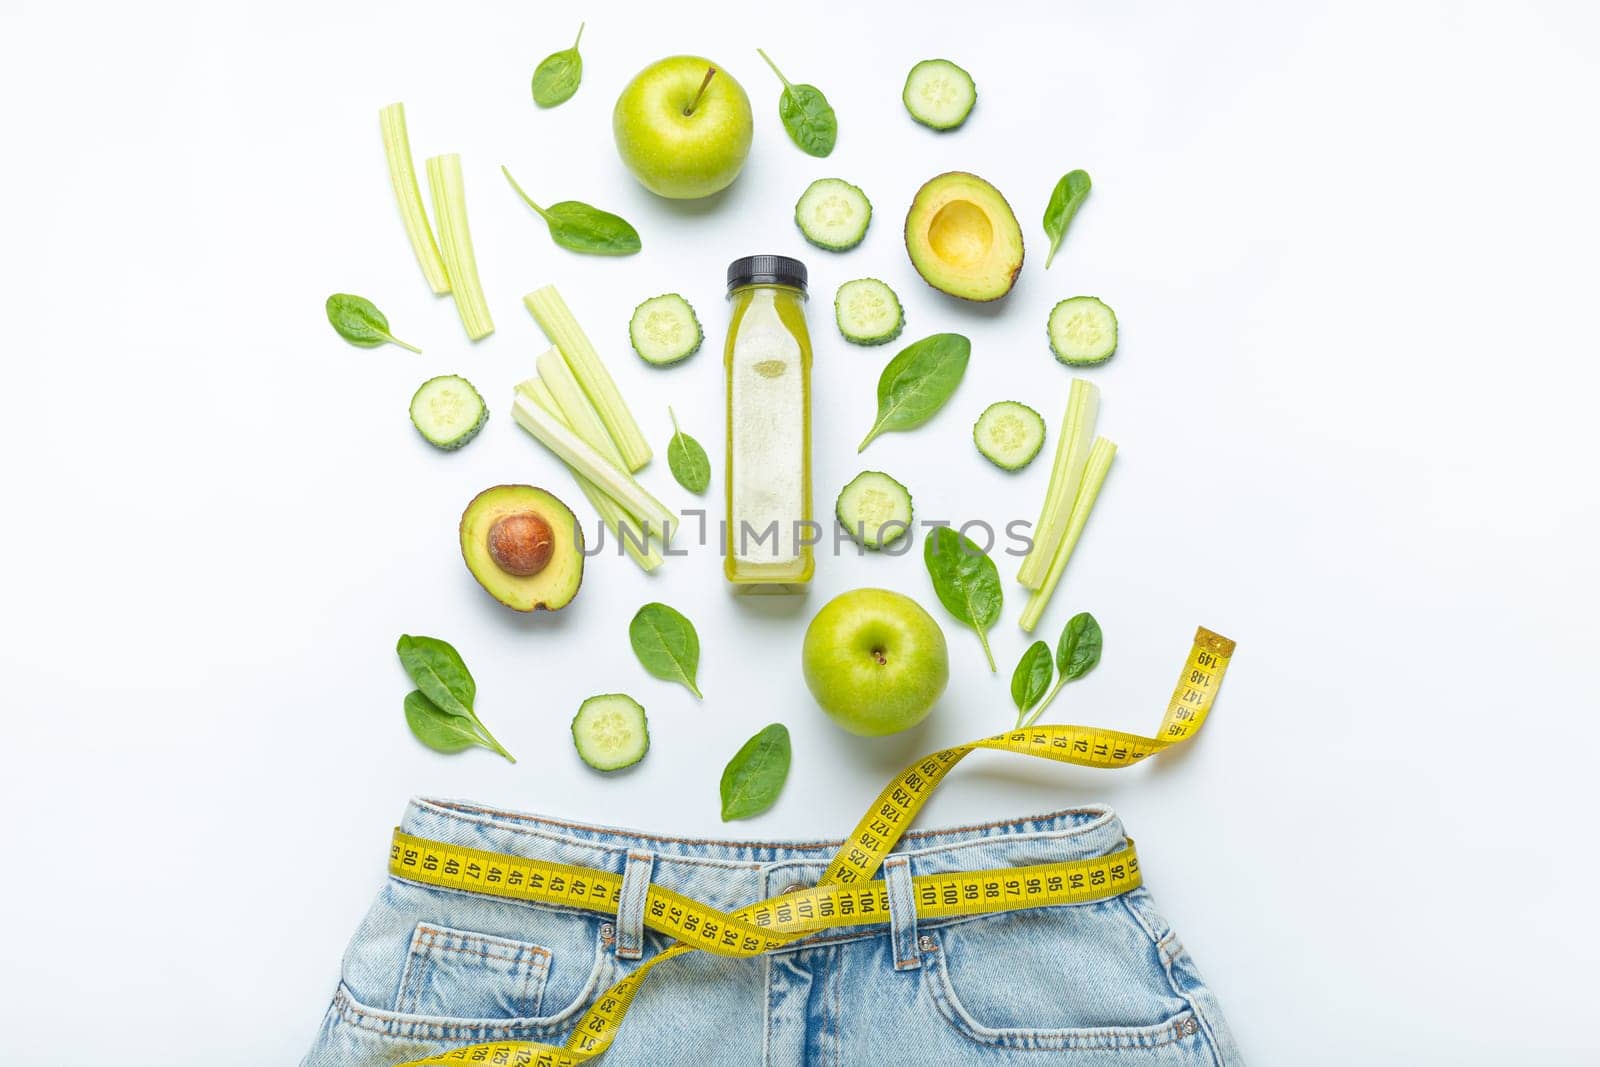 Green fruit, vegetables, smoothie falling into jeans and yellow measuring tape instead of belt on white background. Concept of weight loss, detox, diet, healthy clean nutrition by its_al_dente